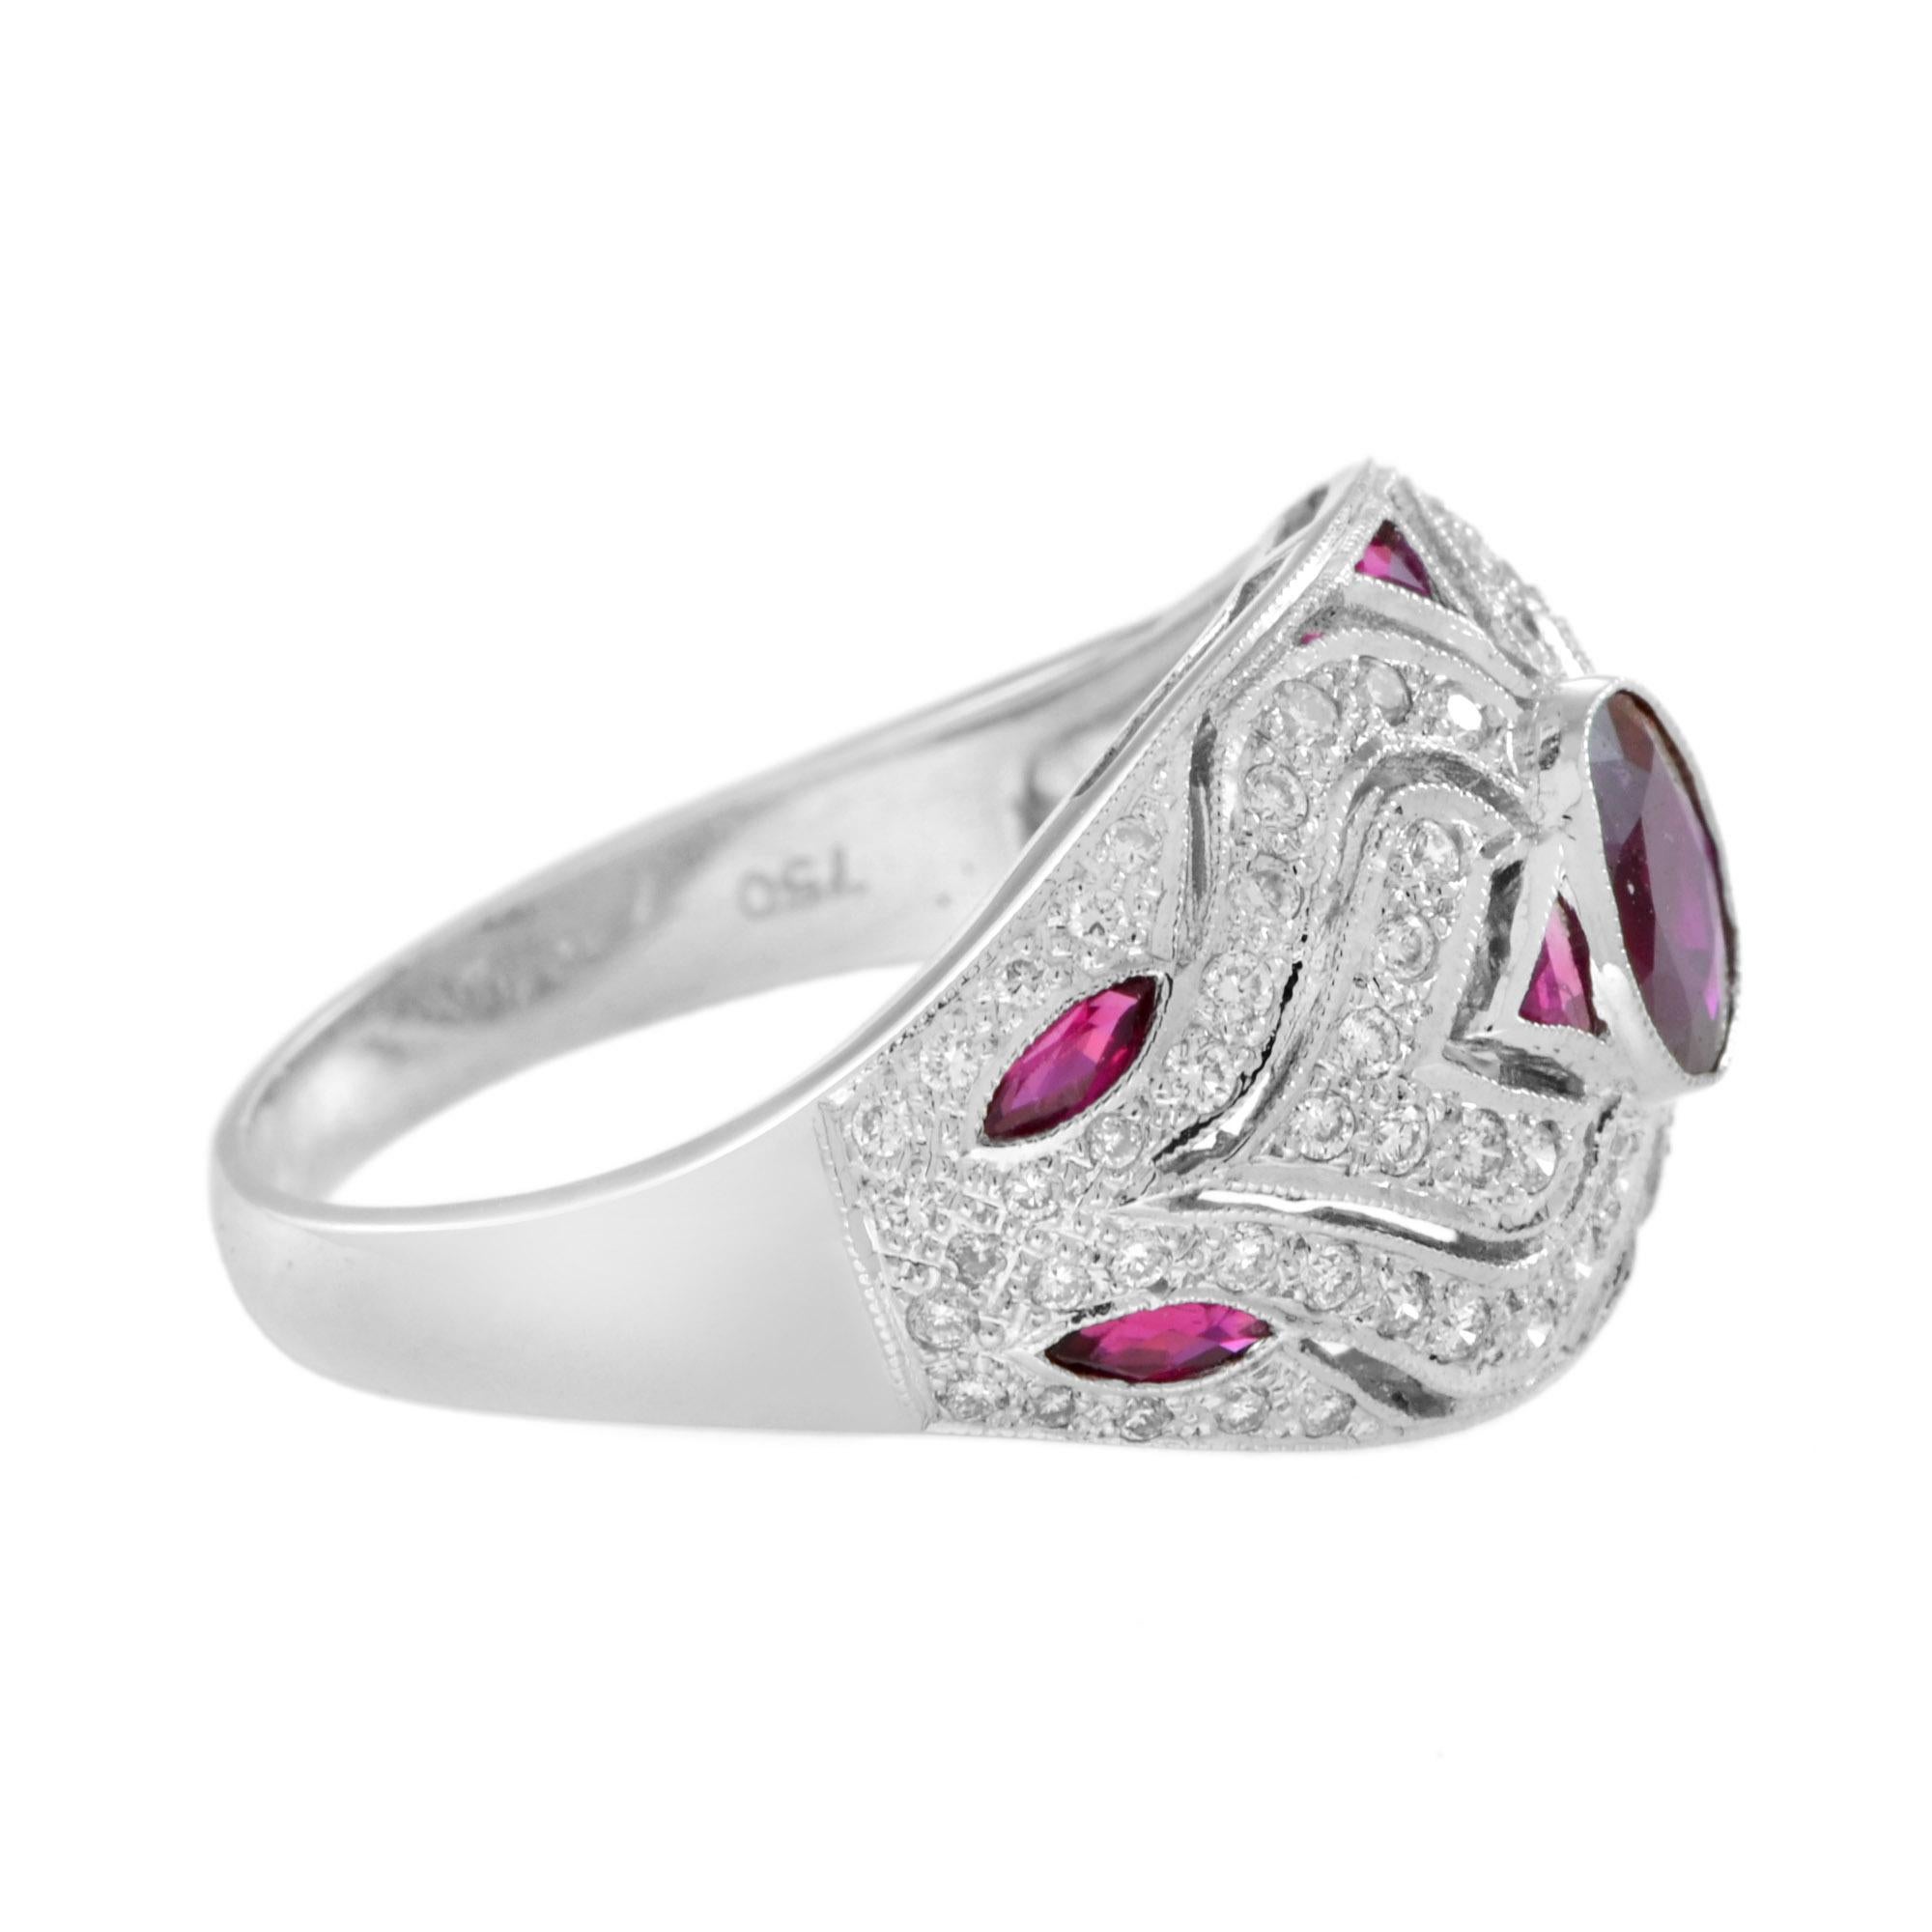 Oval Cut Art Deco Style Oval Ruby and Diamond Bombe Ring in 18K White Gold